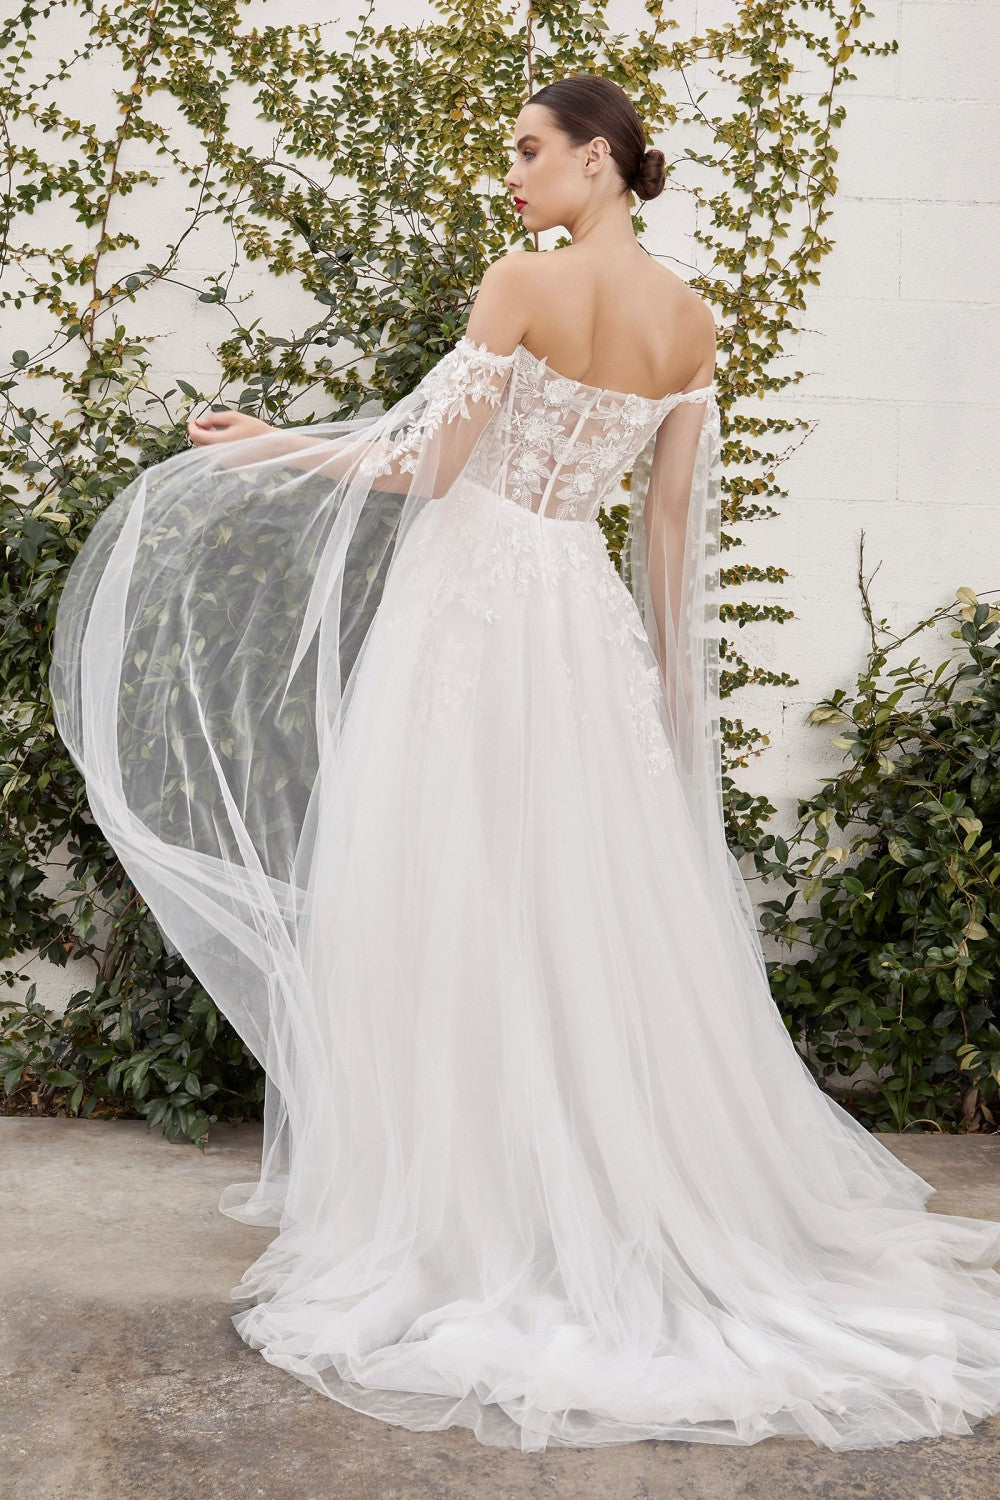 This diaphanous gown features a sheer strapless bodice and frothy A-line skirt cut from layers of soft tulle to a floor-sweeping hem. The bodice has supportive internal boning to ensure it stays in place and is framed by elongated tulle sleeves split along the inseam, falling to meet the hem of the skirt and conjuring up an ethereal mood. Hand cut degrade lace placements flower about with pearlescent beaded accents.